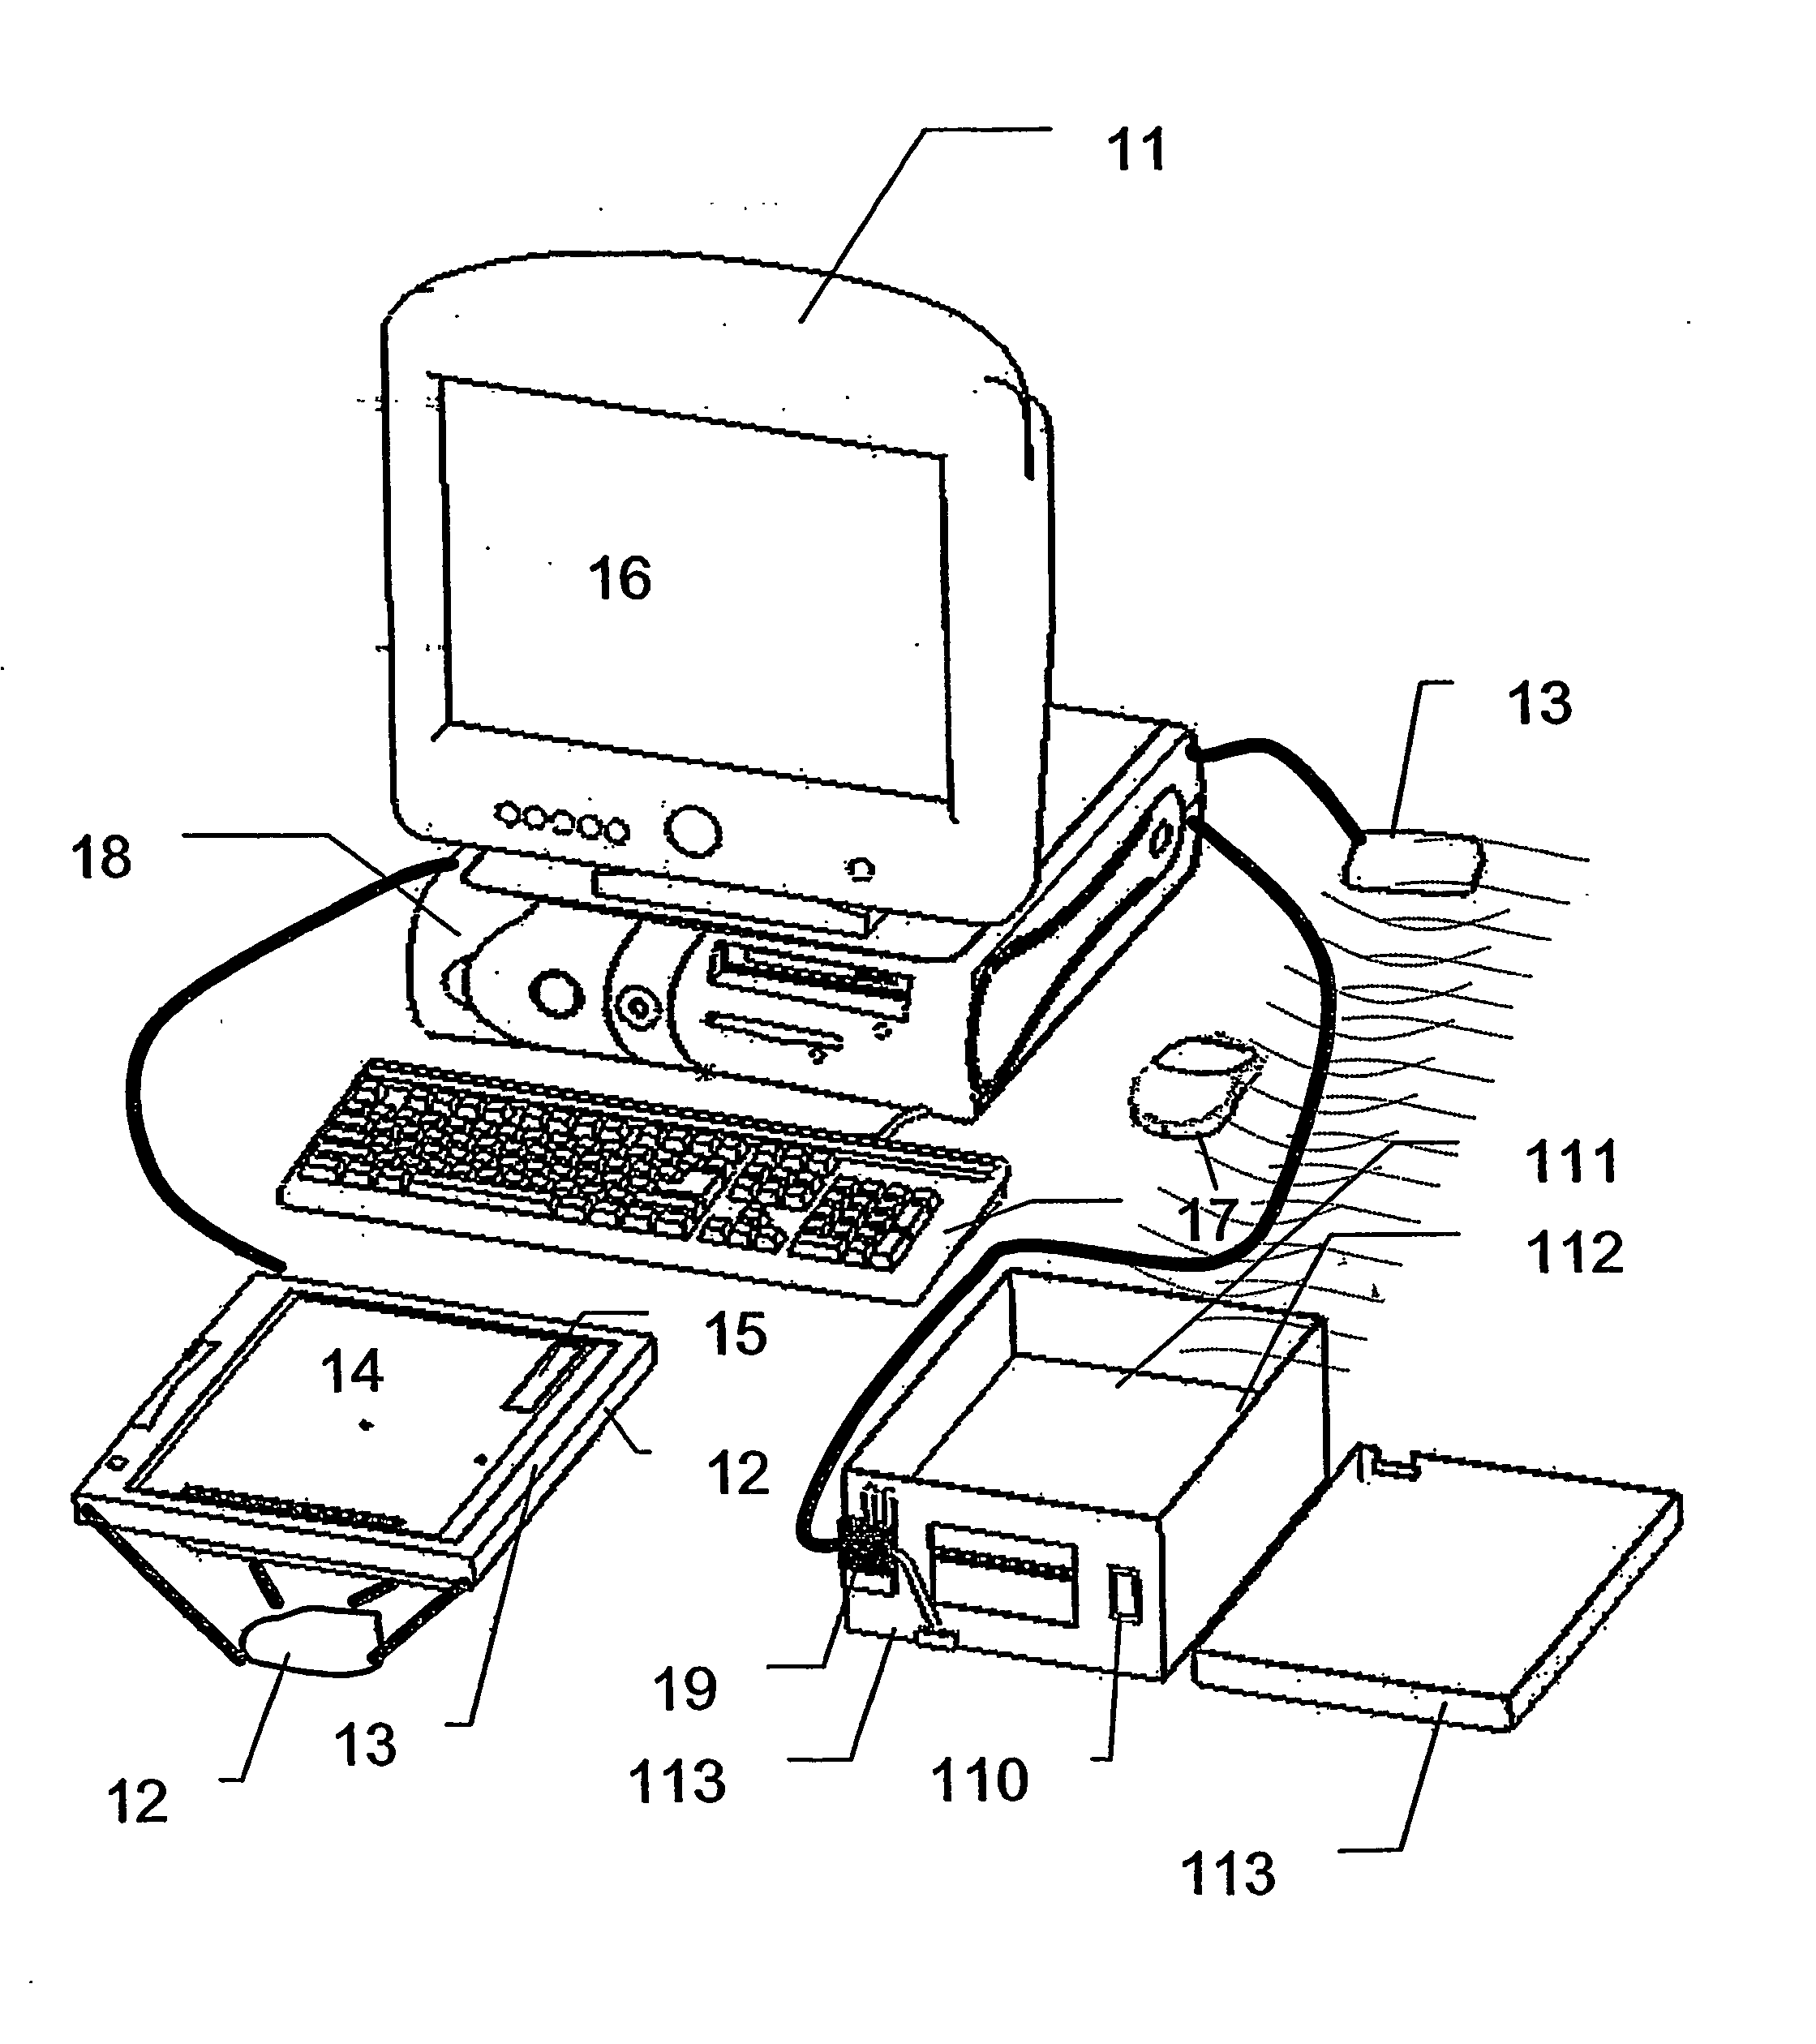 Apparatus and Process for Distributed Autonomous Managing of Documents and Electronic Means